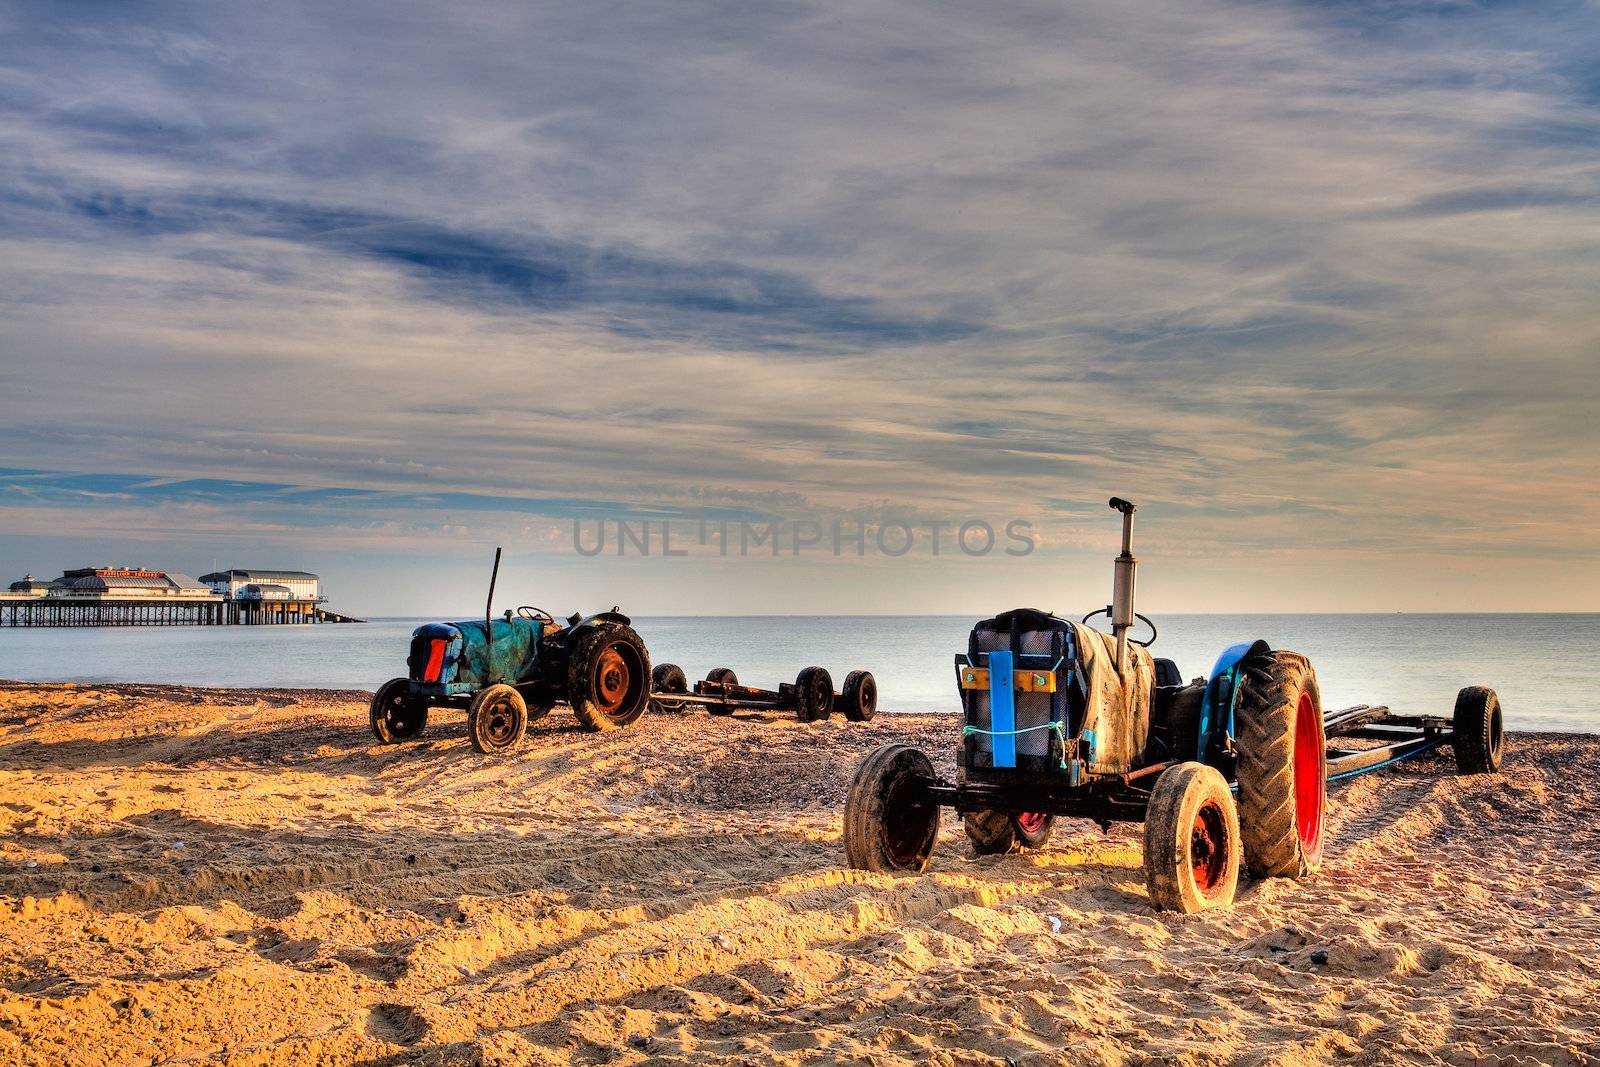 Tractor at Cromer beach in Great Britain